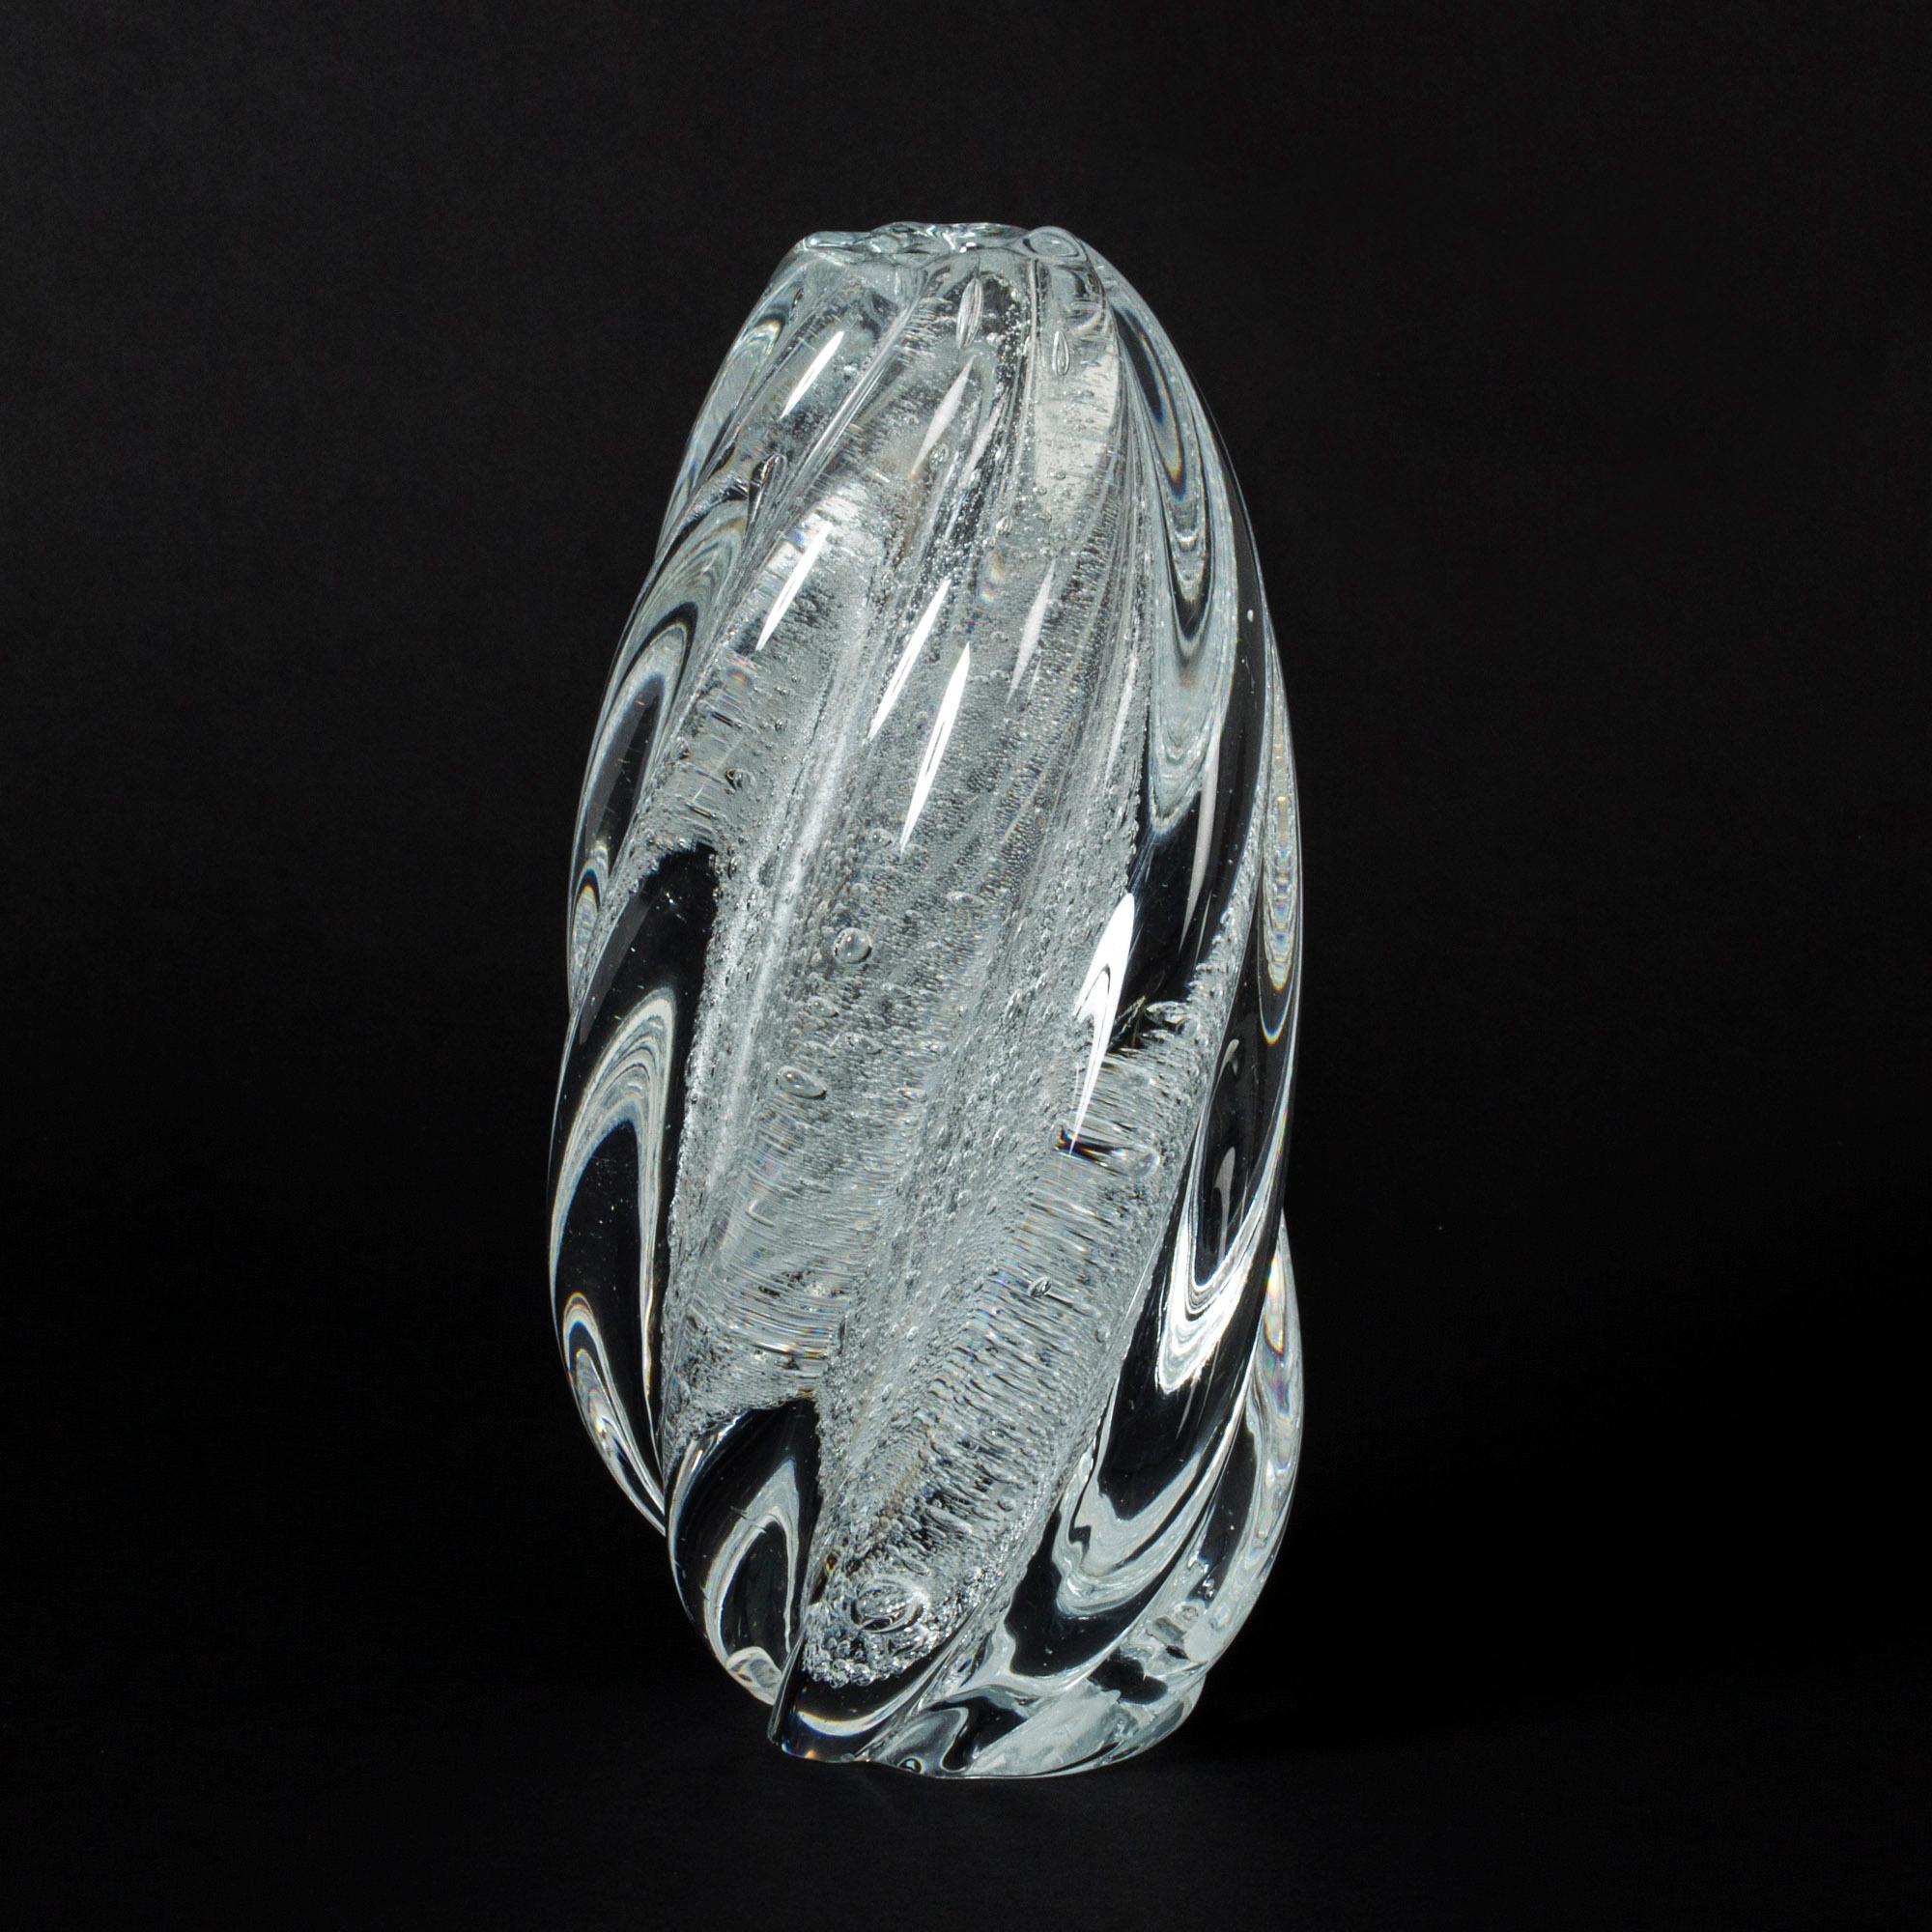 Beautiful hand blown glass vase by Tapio Wirkkala. Twisted form with a flow of air bubbles caught inside. Striking appearance of movement, like a current.